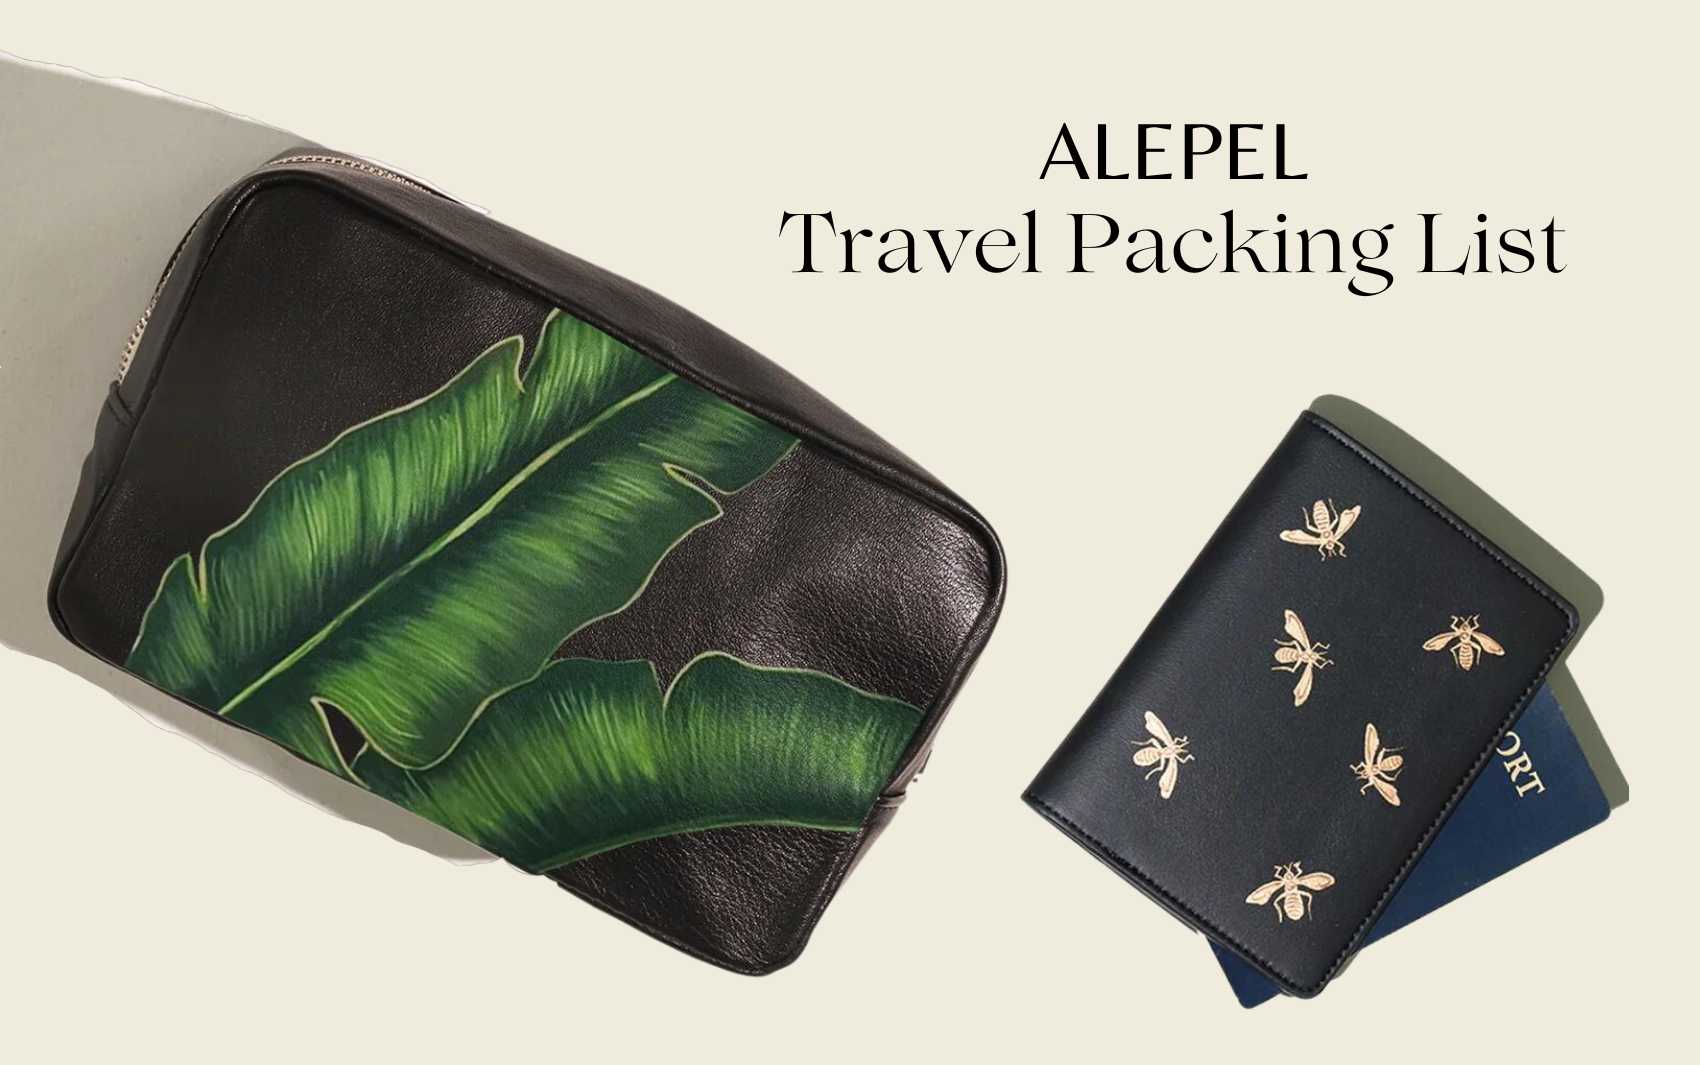 ALEPEL Travel Packing List